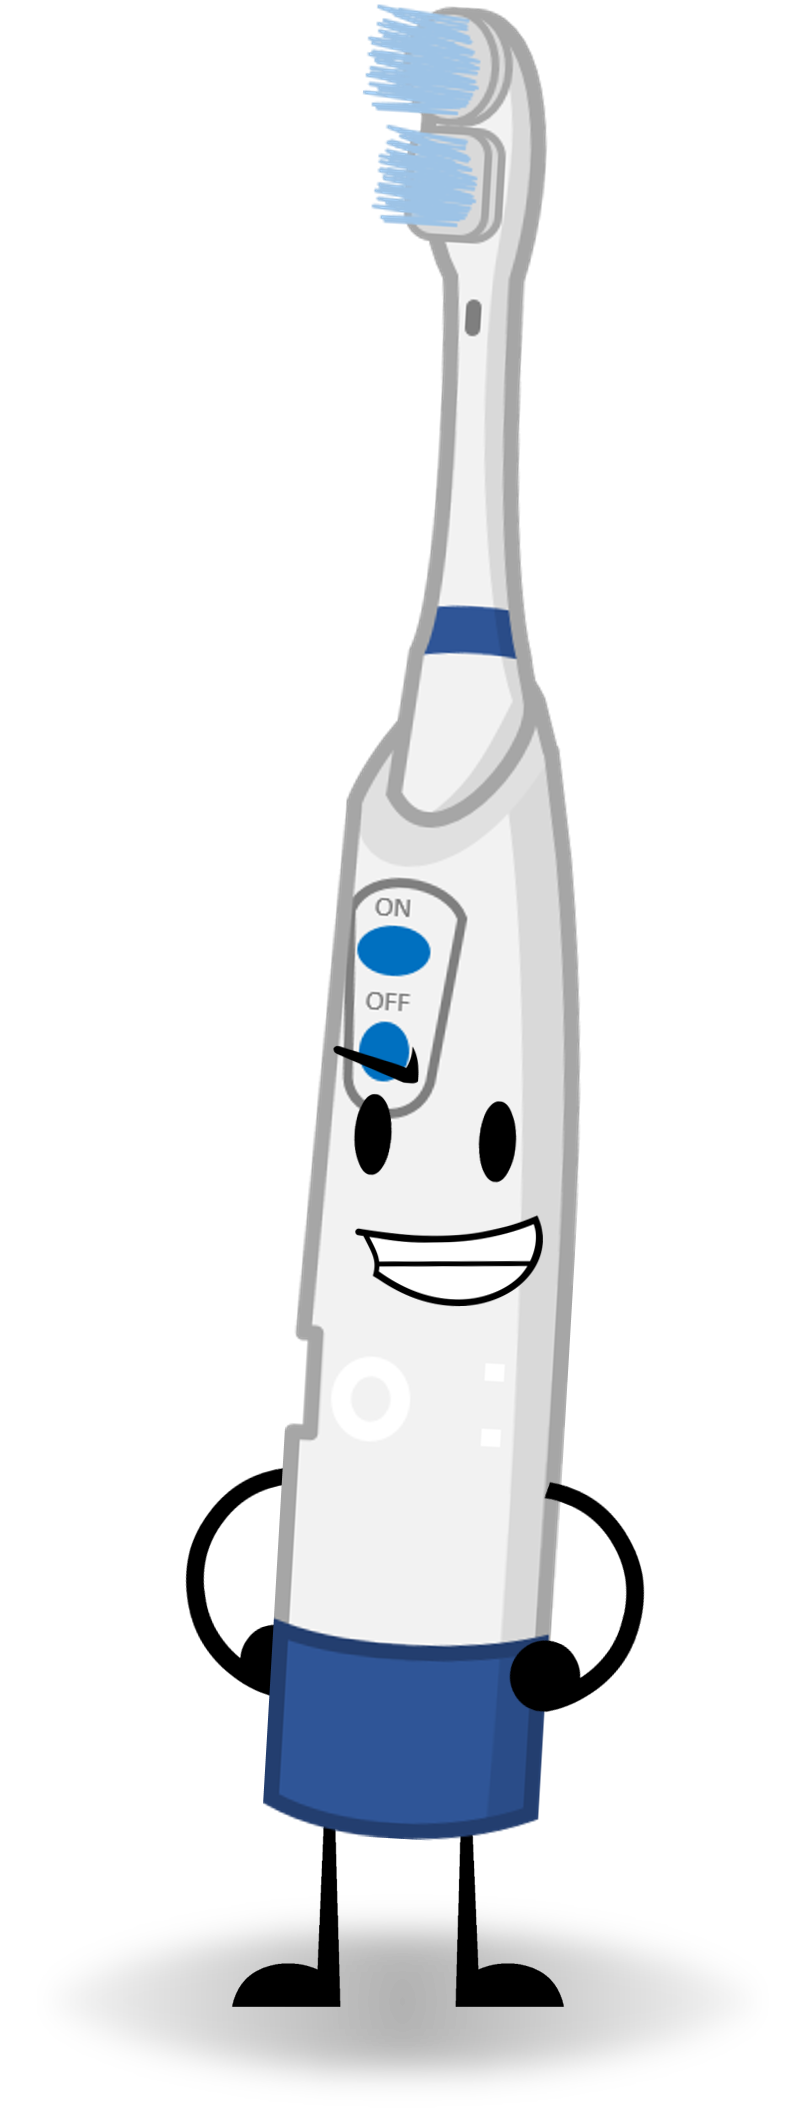 Image toothbrush png object. Hamster clipart bottle